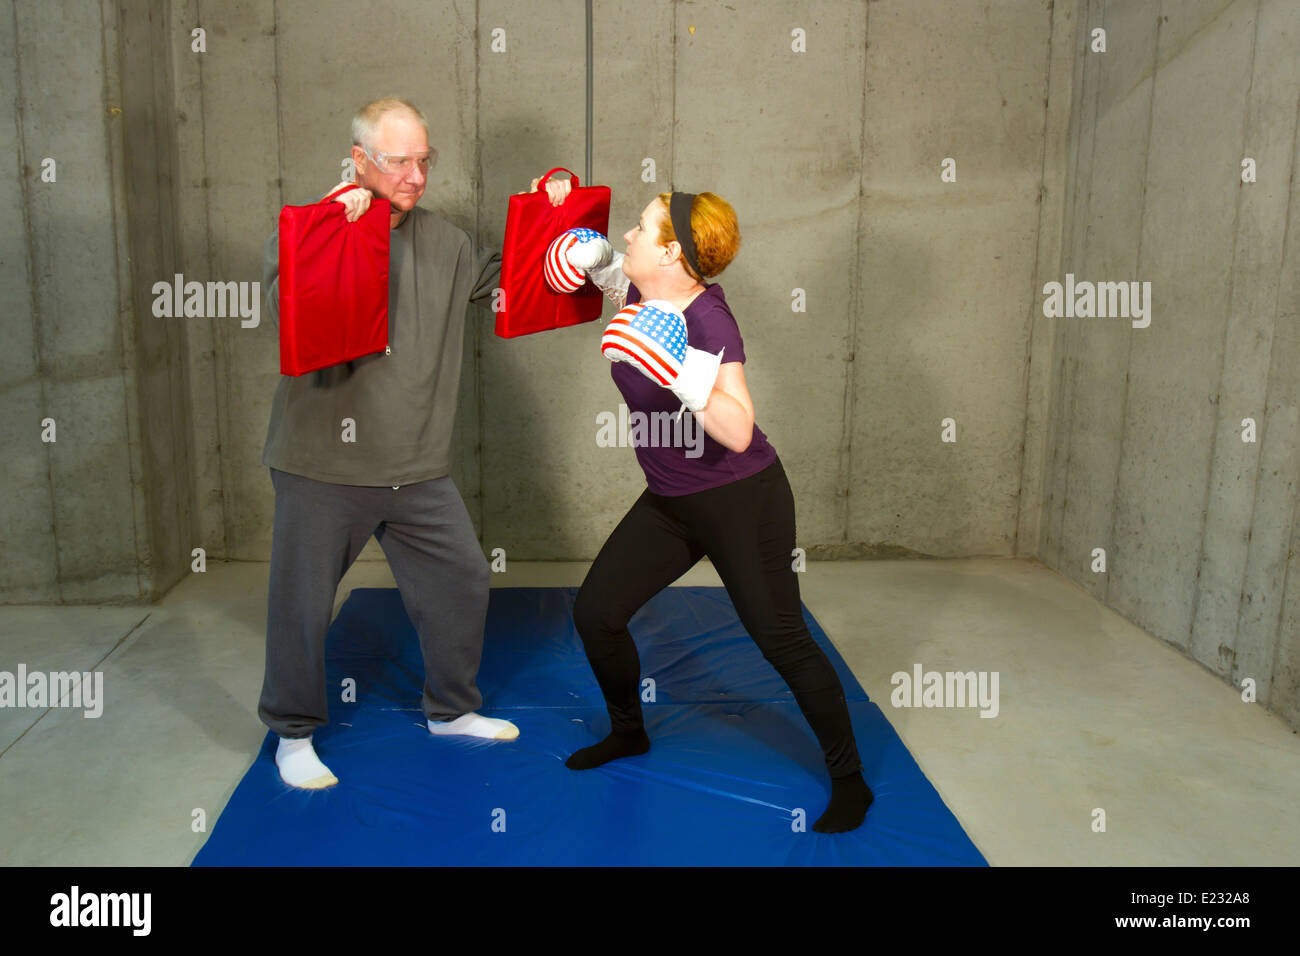 Mature women learning how to box against a man during a self defense class  Stock Photo - Alamy